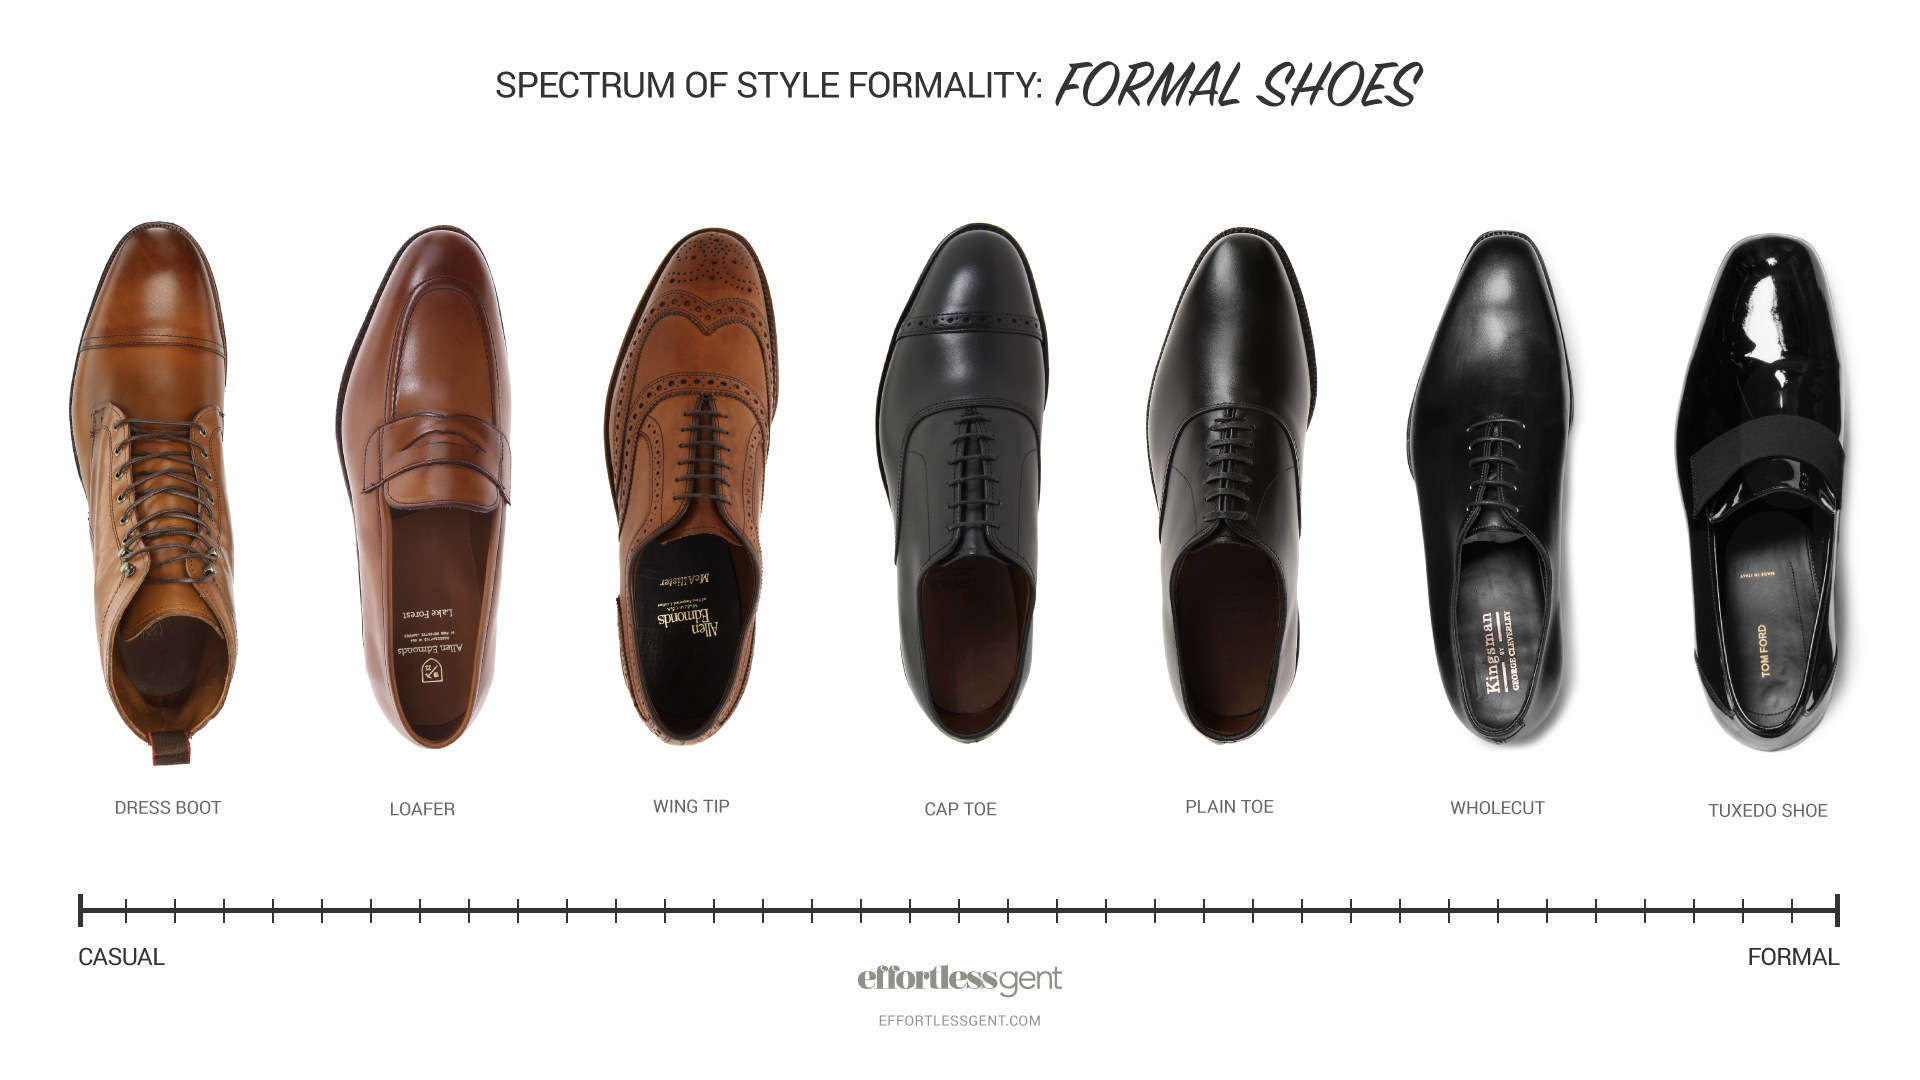 Spectrum of Style Formality: How to mix and match casual and dressy clothes